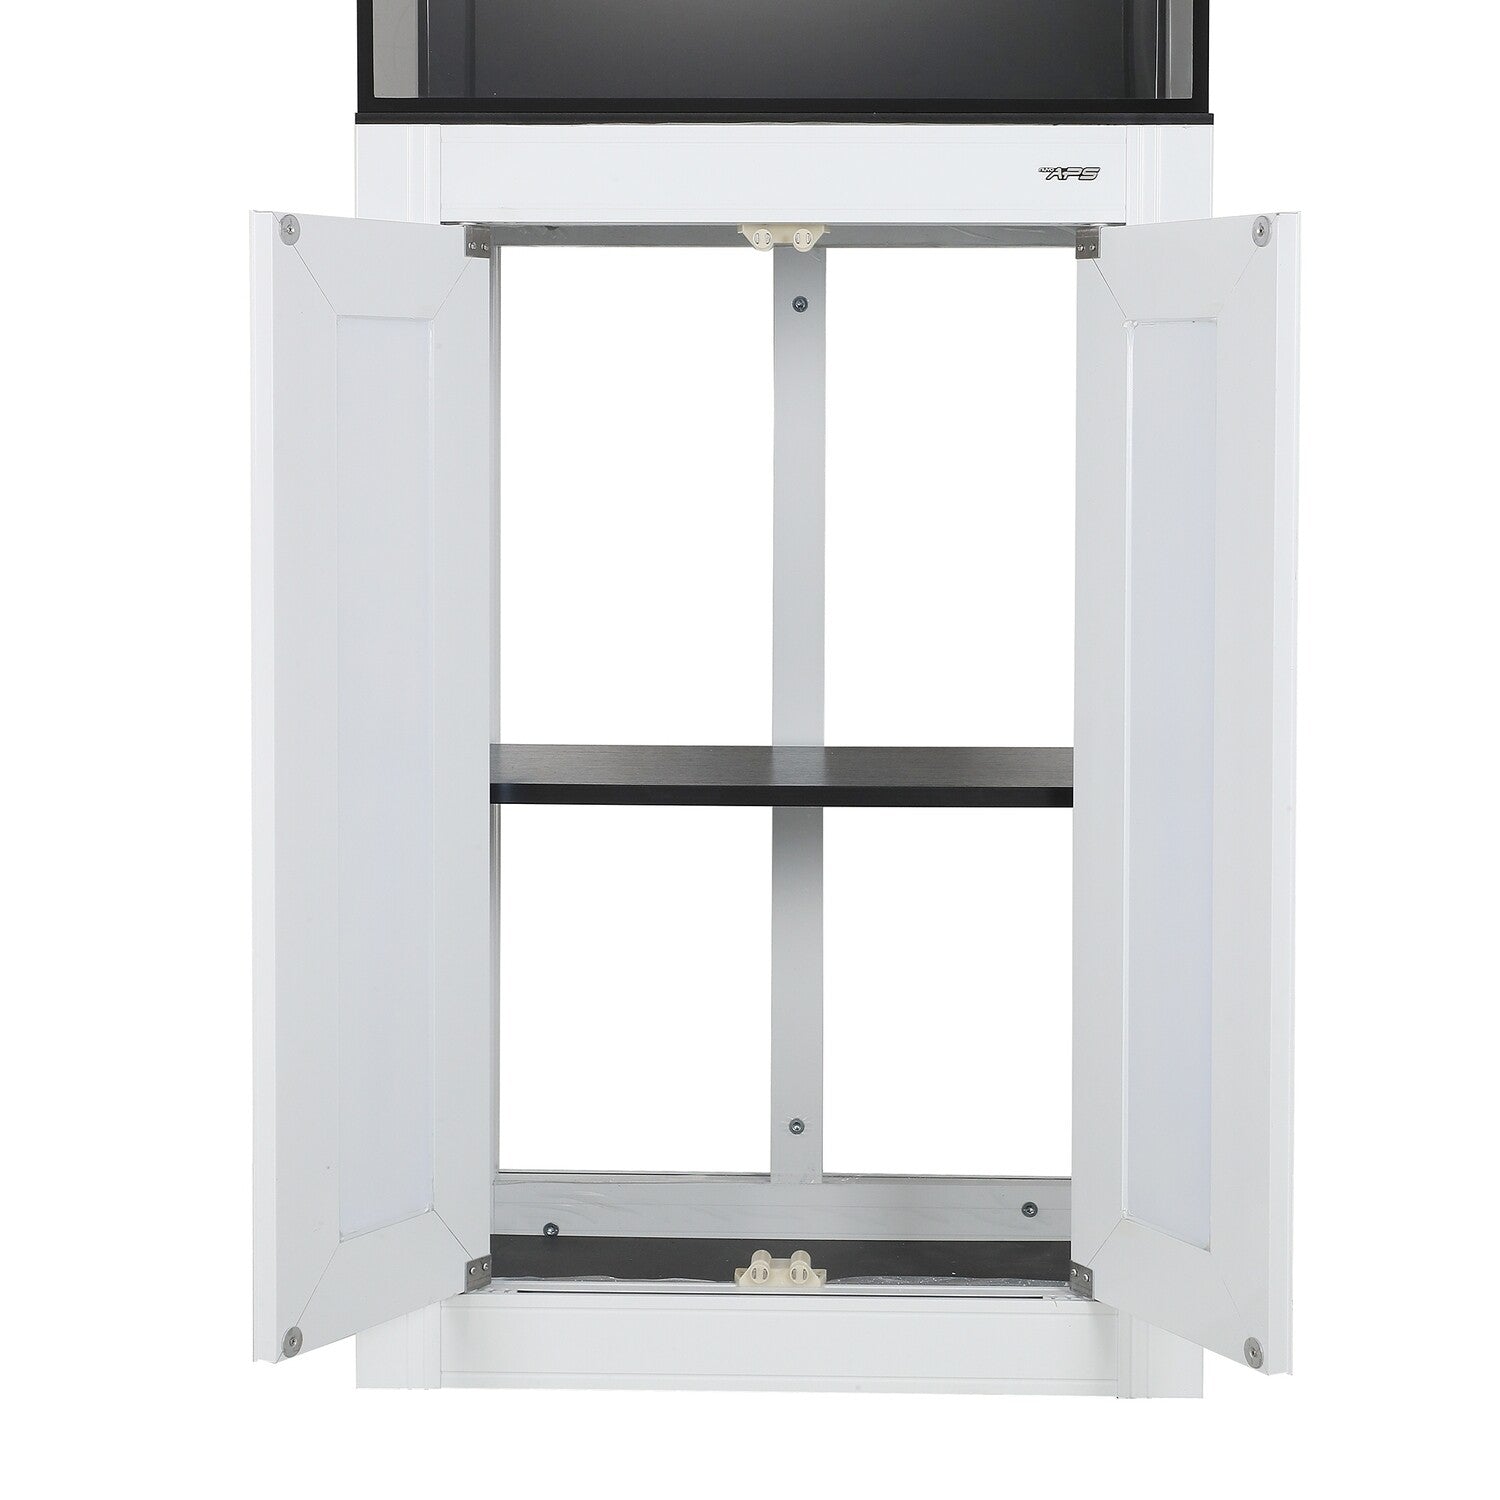 Innovative Marine NUVO Fusion 20 APS Stand - White